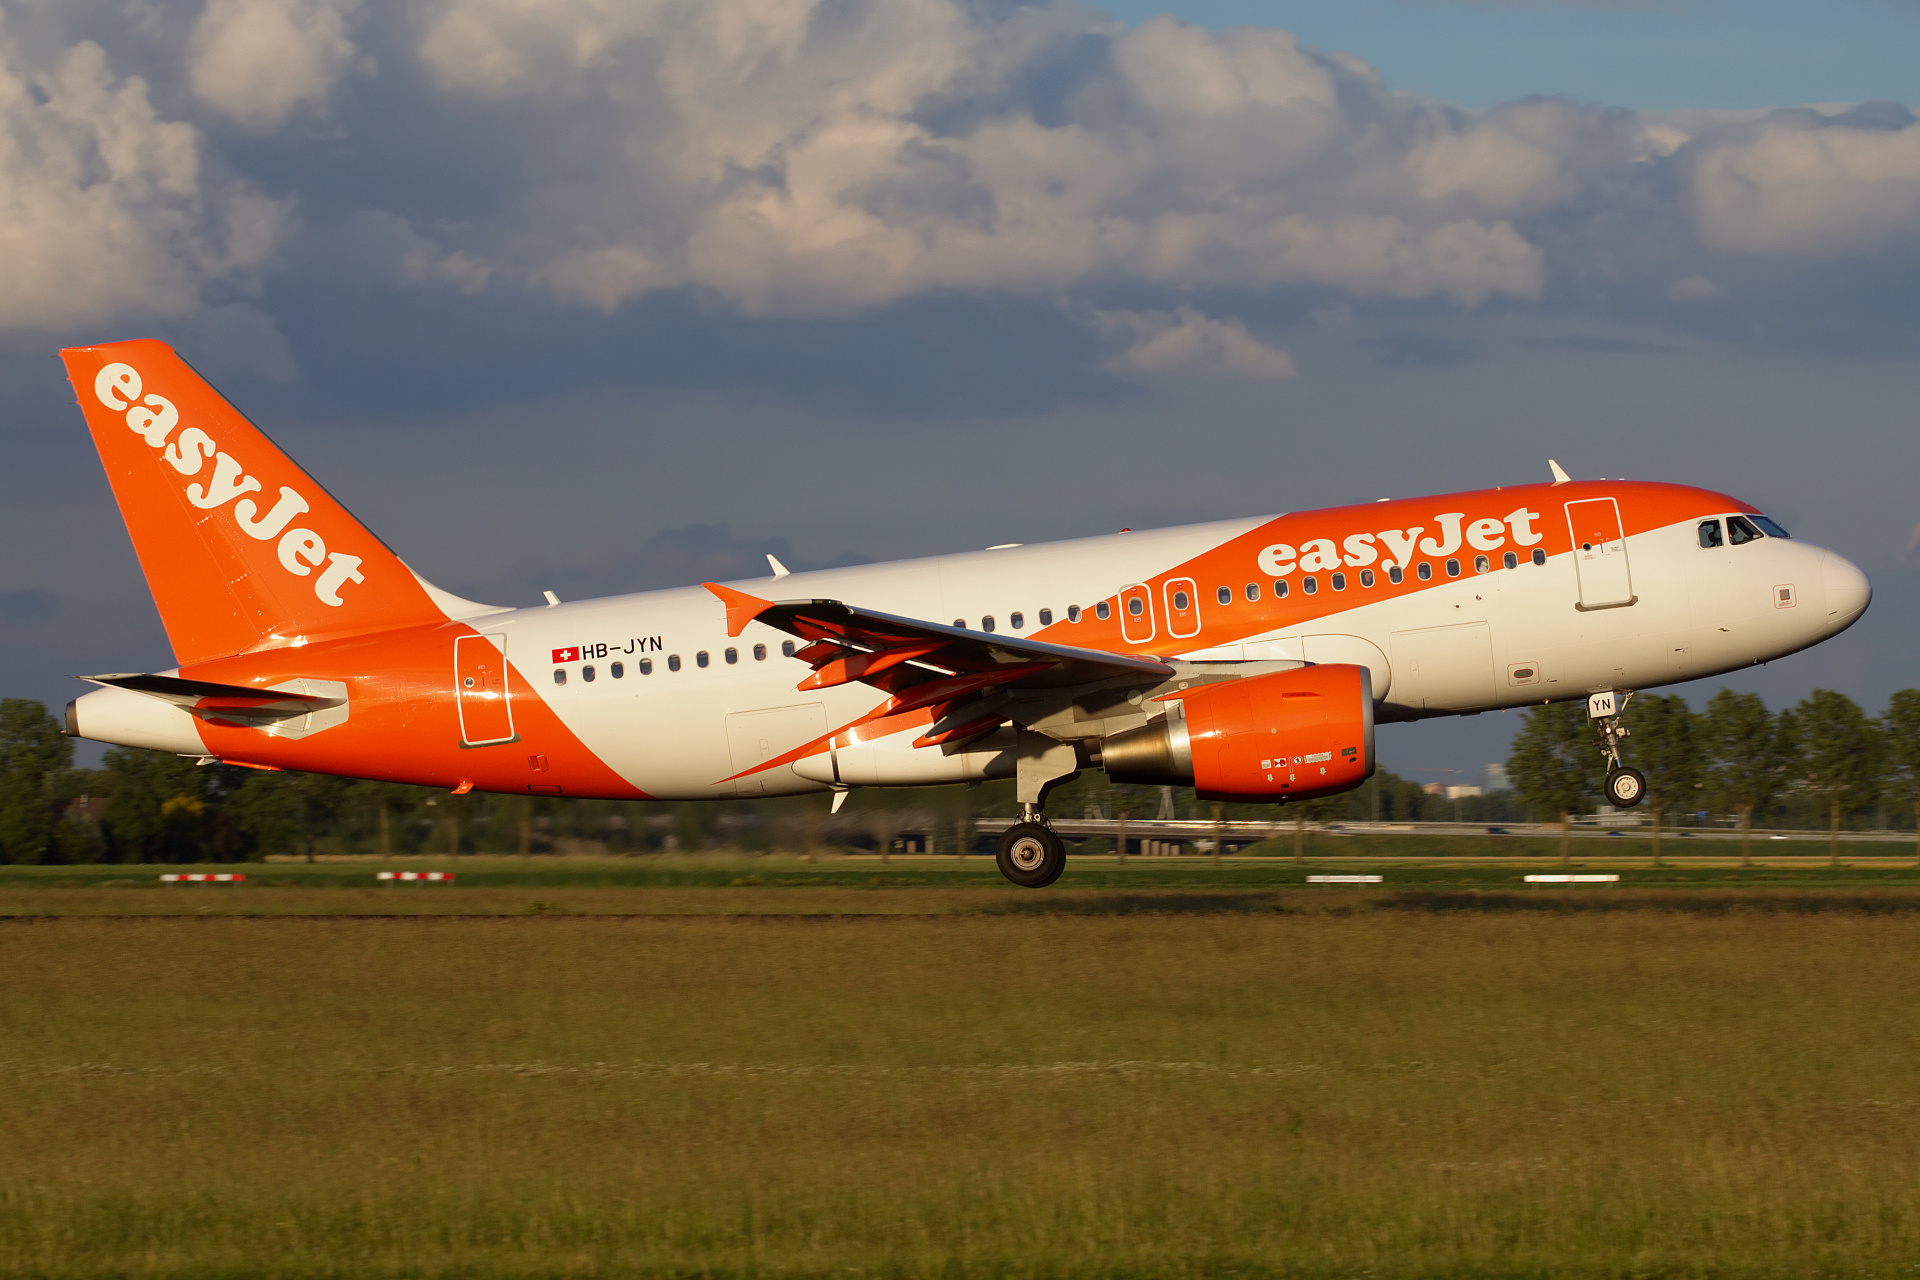 HB-JYN, EasyJet (Aircraft » Schiphol Spotting » Airbus A319-100)